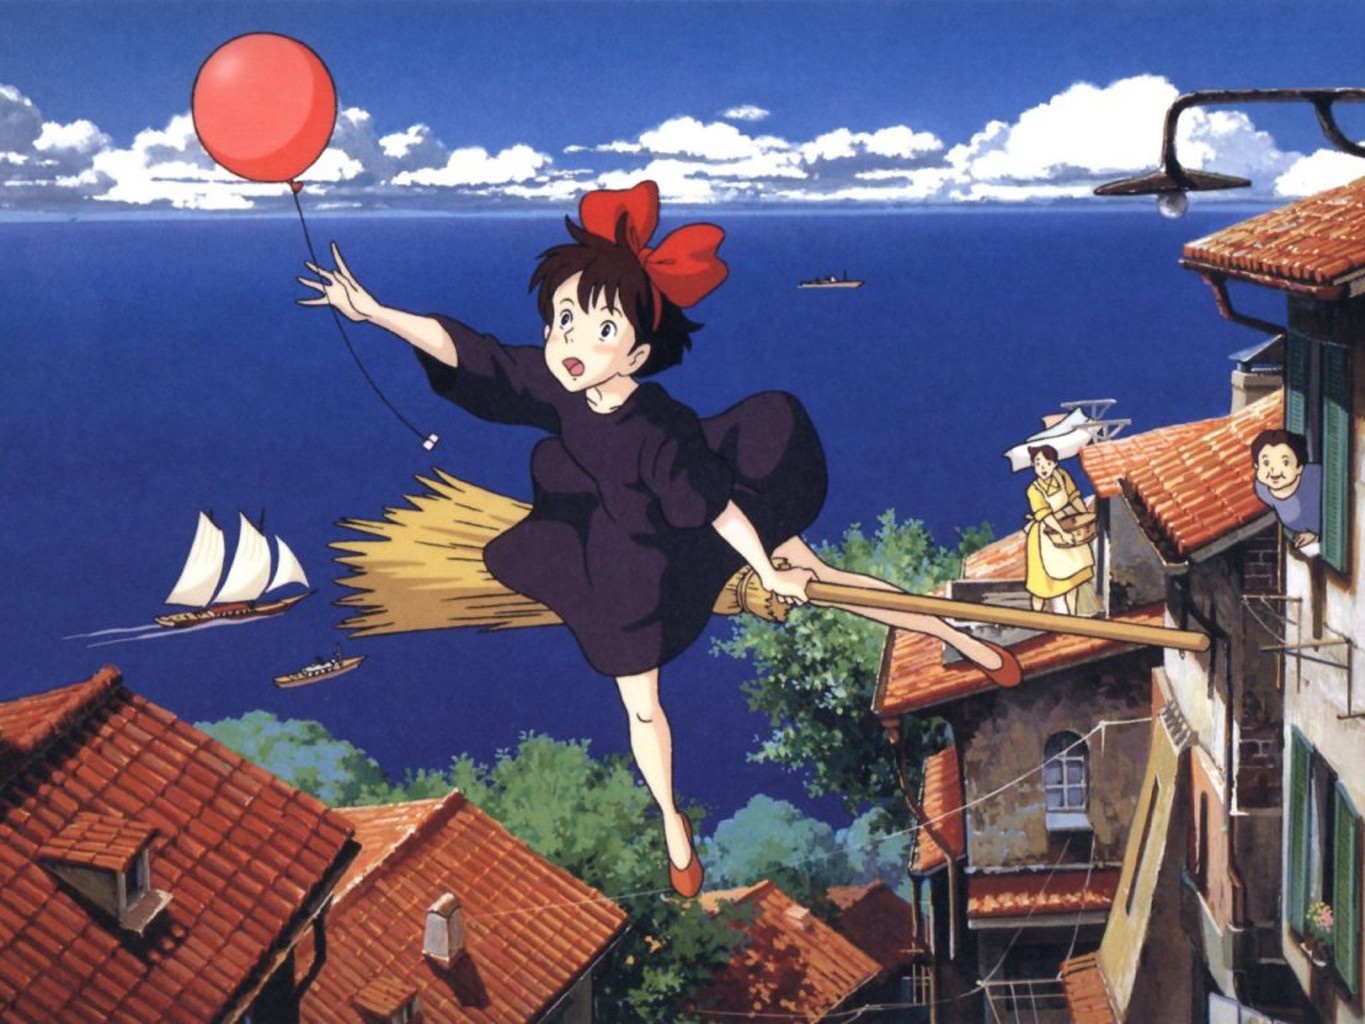 kiki's-delivery-service-screenshots-wallpapers-112325-2331051-8778396....